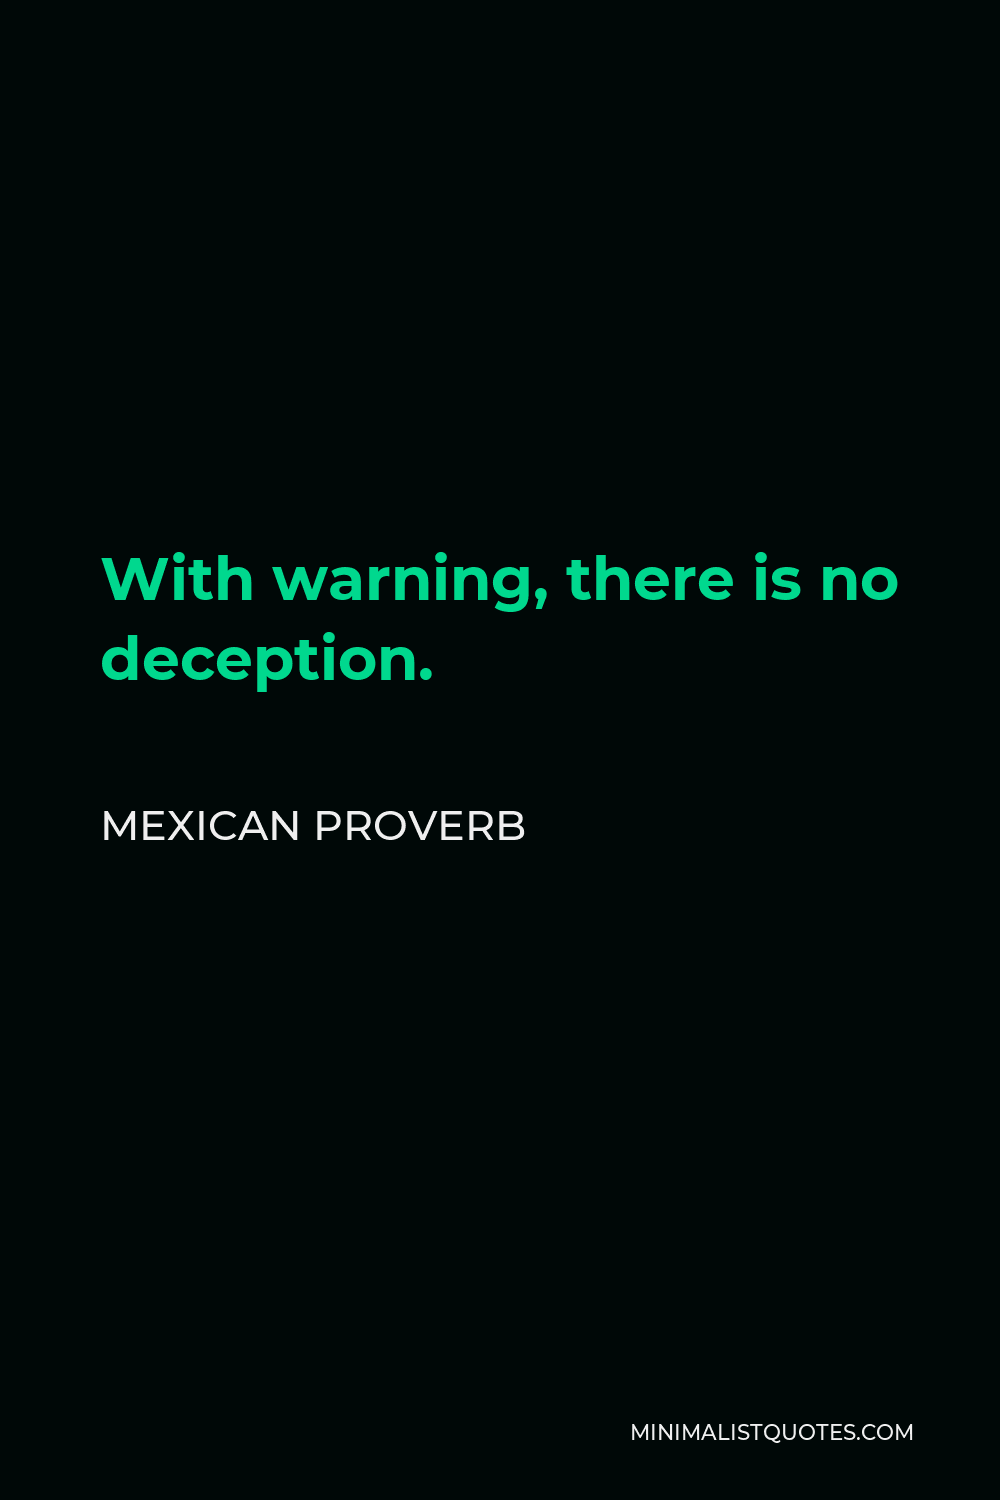 Mexican Proverb Quote - With warning, there is no deception.